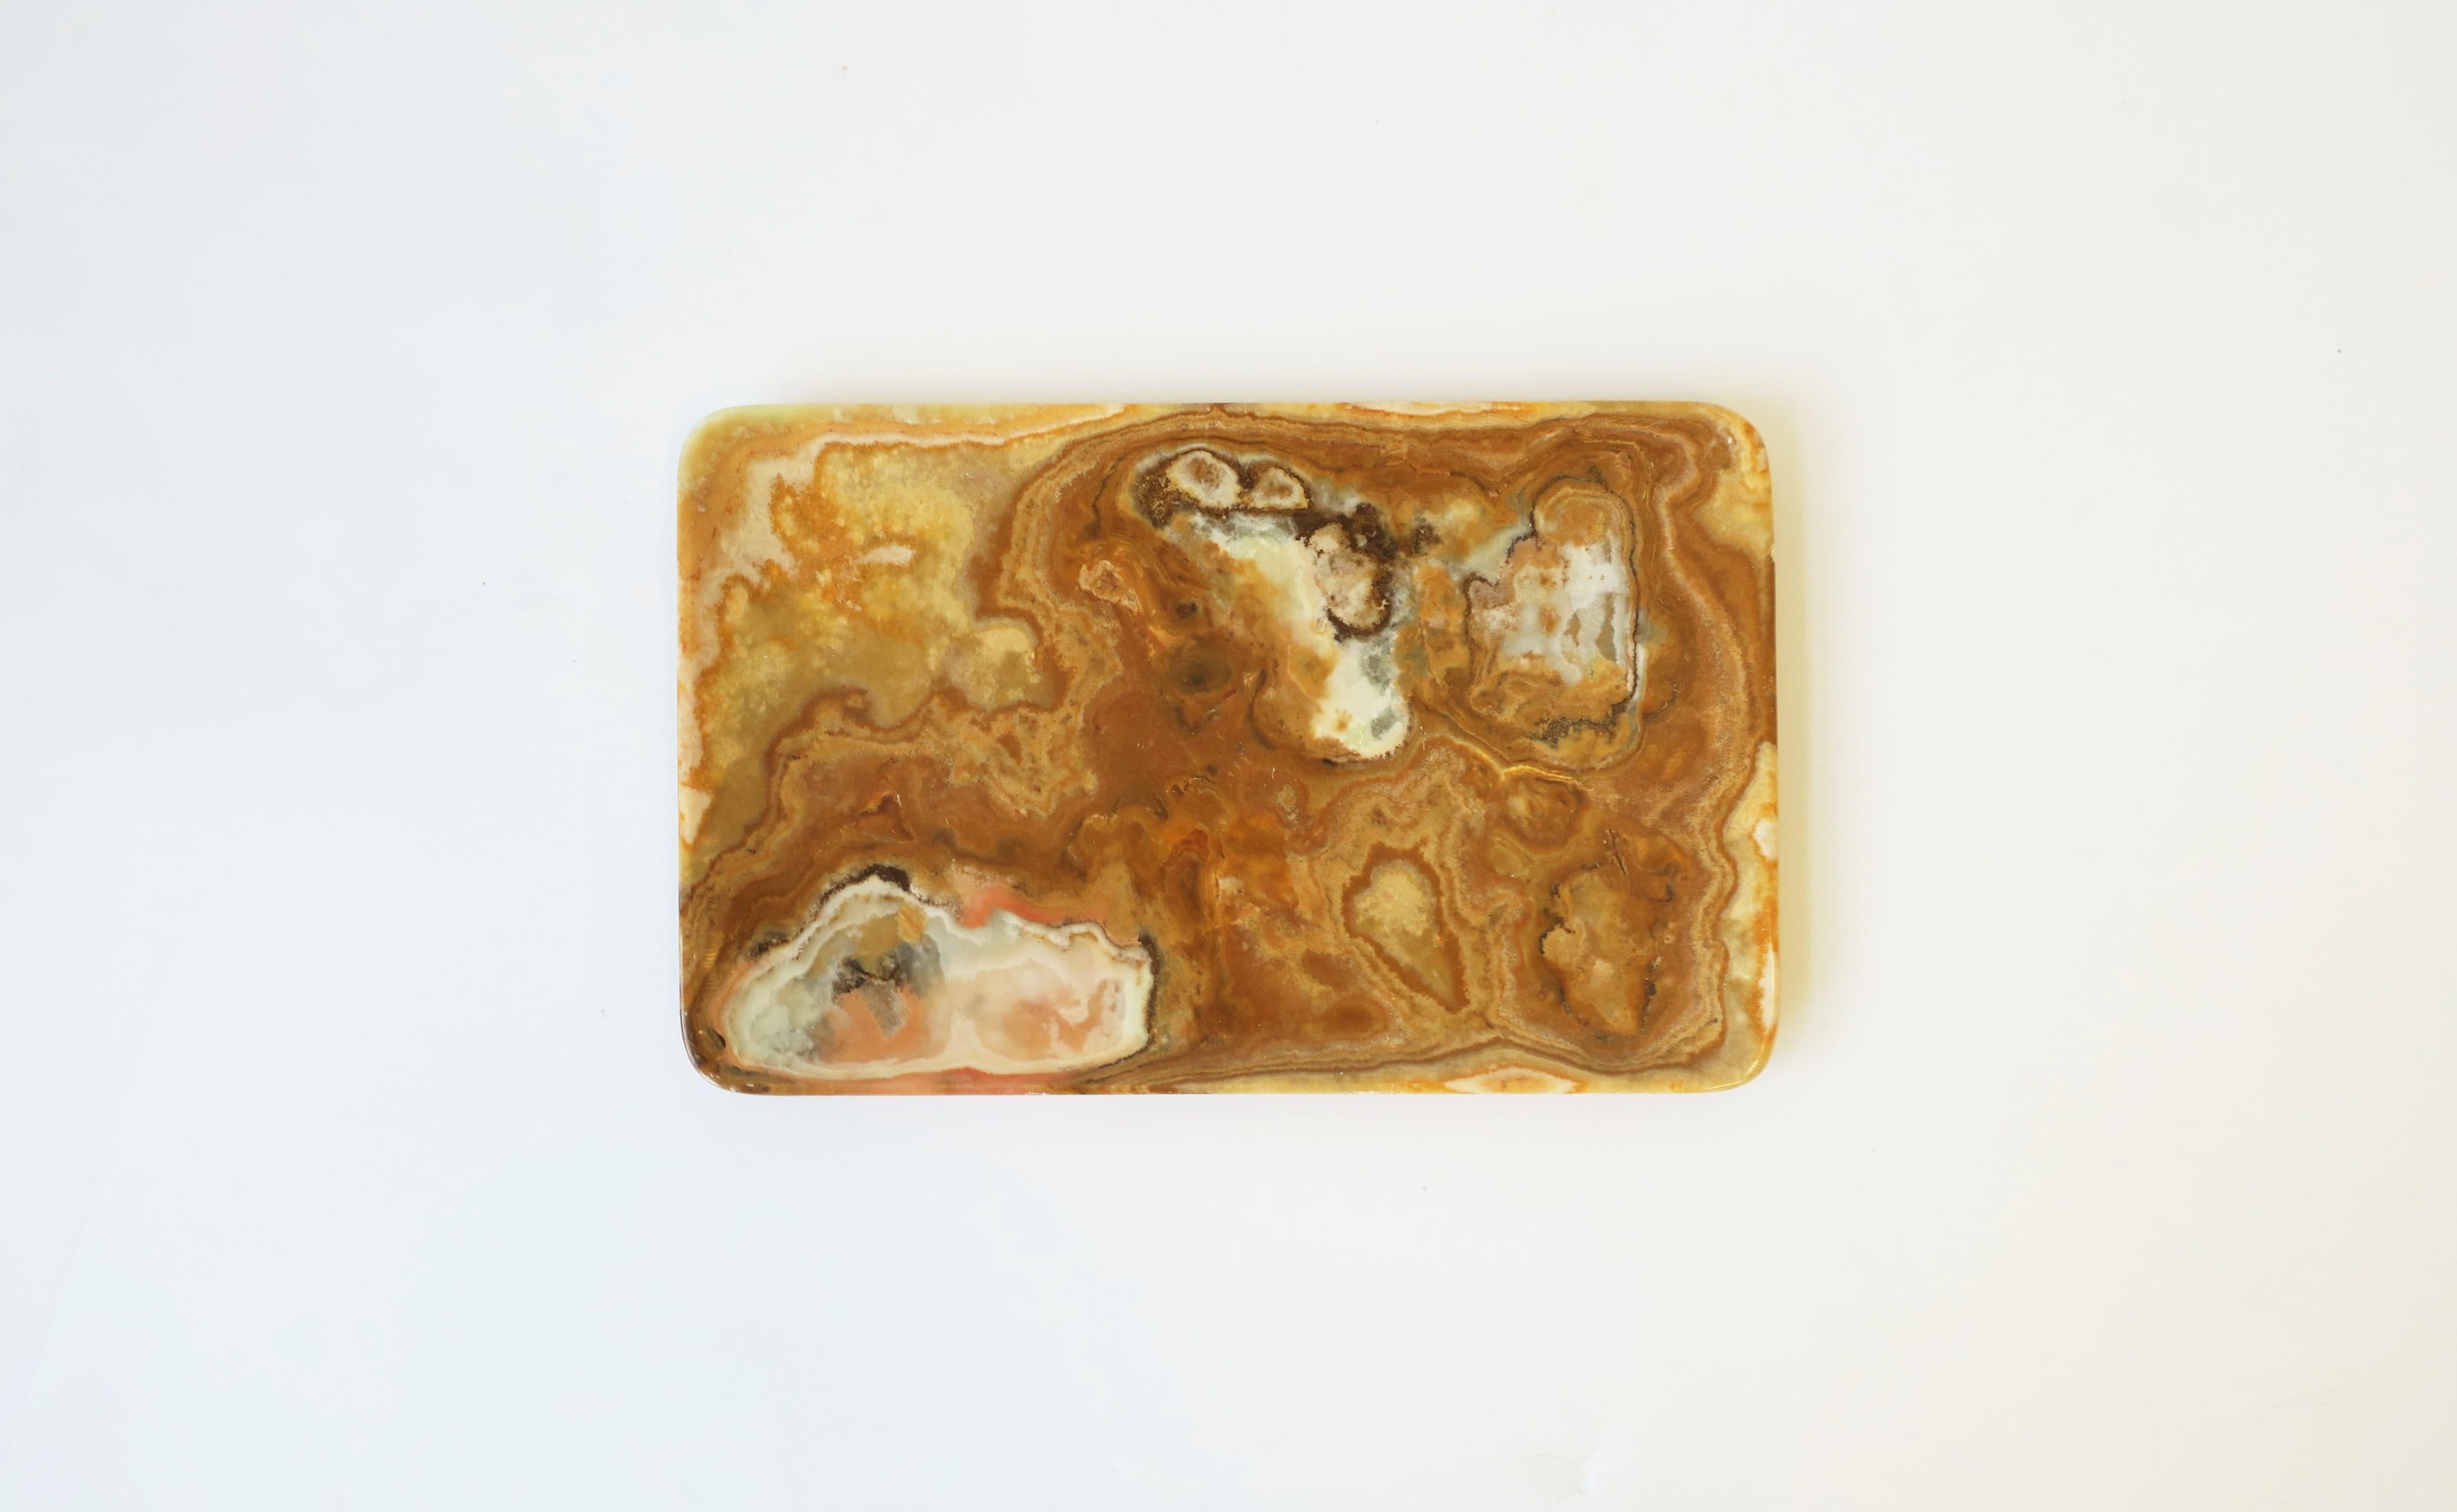 A beautiful onyx marble tray, dish, or vide-poche. Piece makes a nice catch-all for jewelry or other small items (e.g., coin change, keys, etc.,) for a desk, console, nightstand, or bathroom vanity area, etc. 

Piece measures: 7